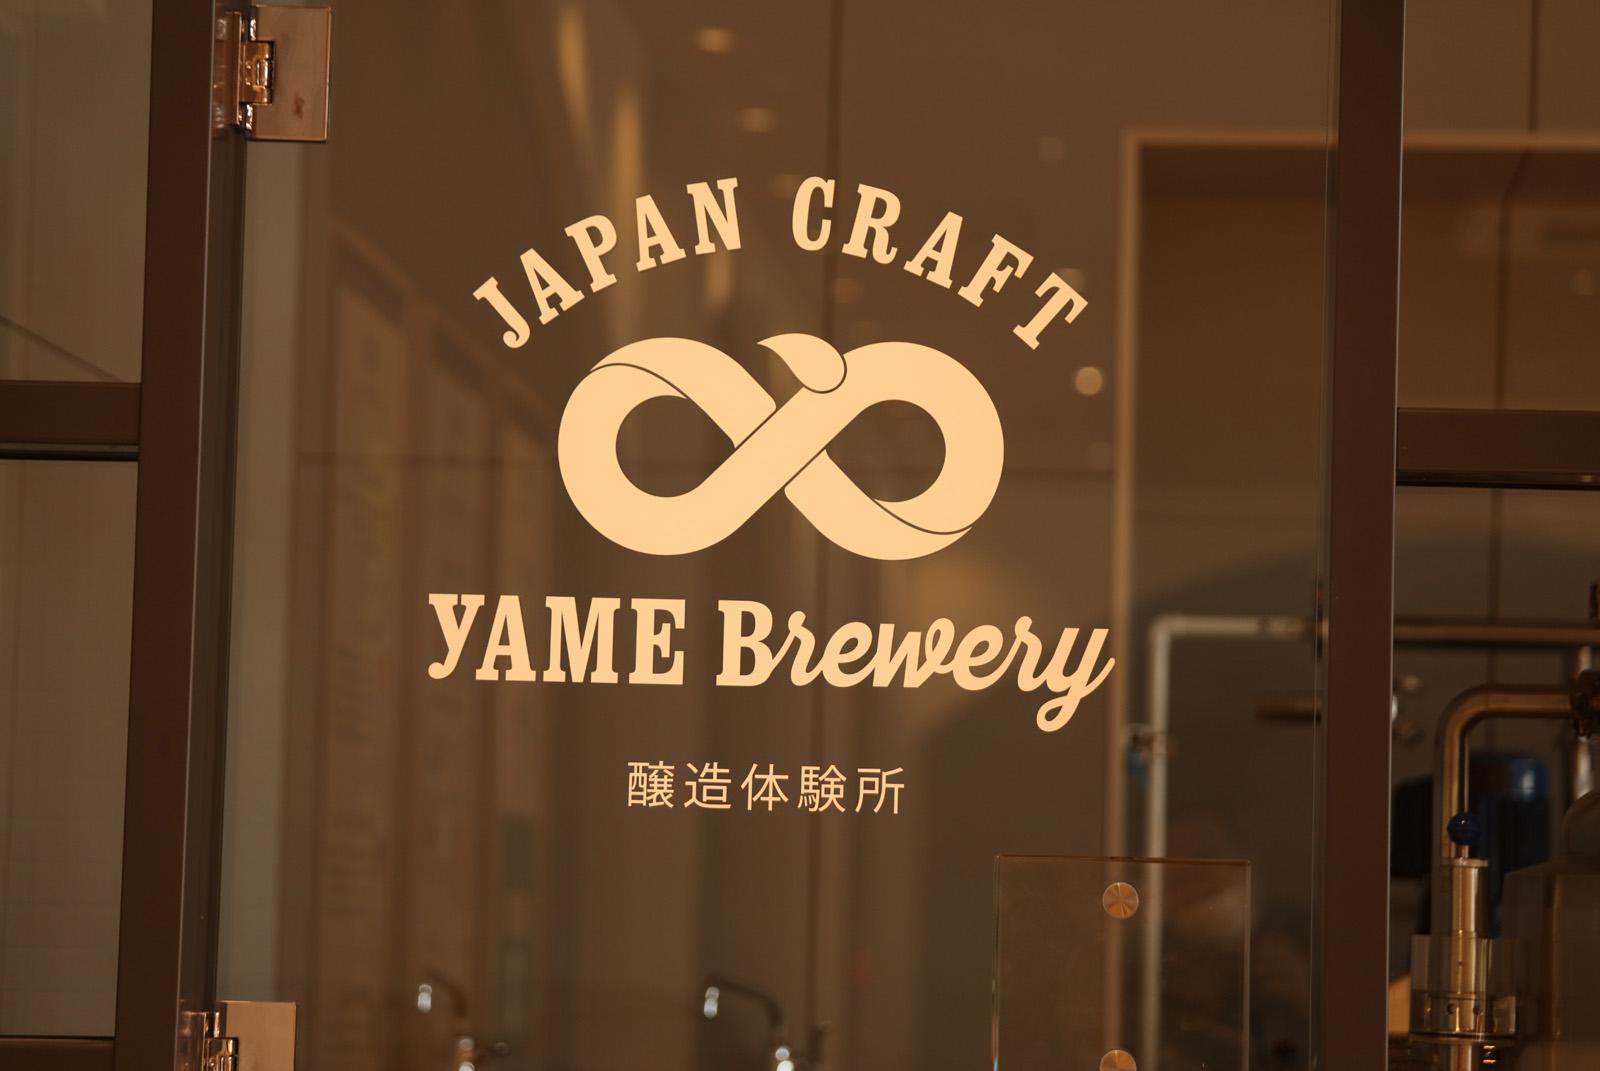 Experience making craft beer at the Yame Brewery-2